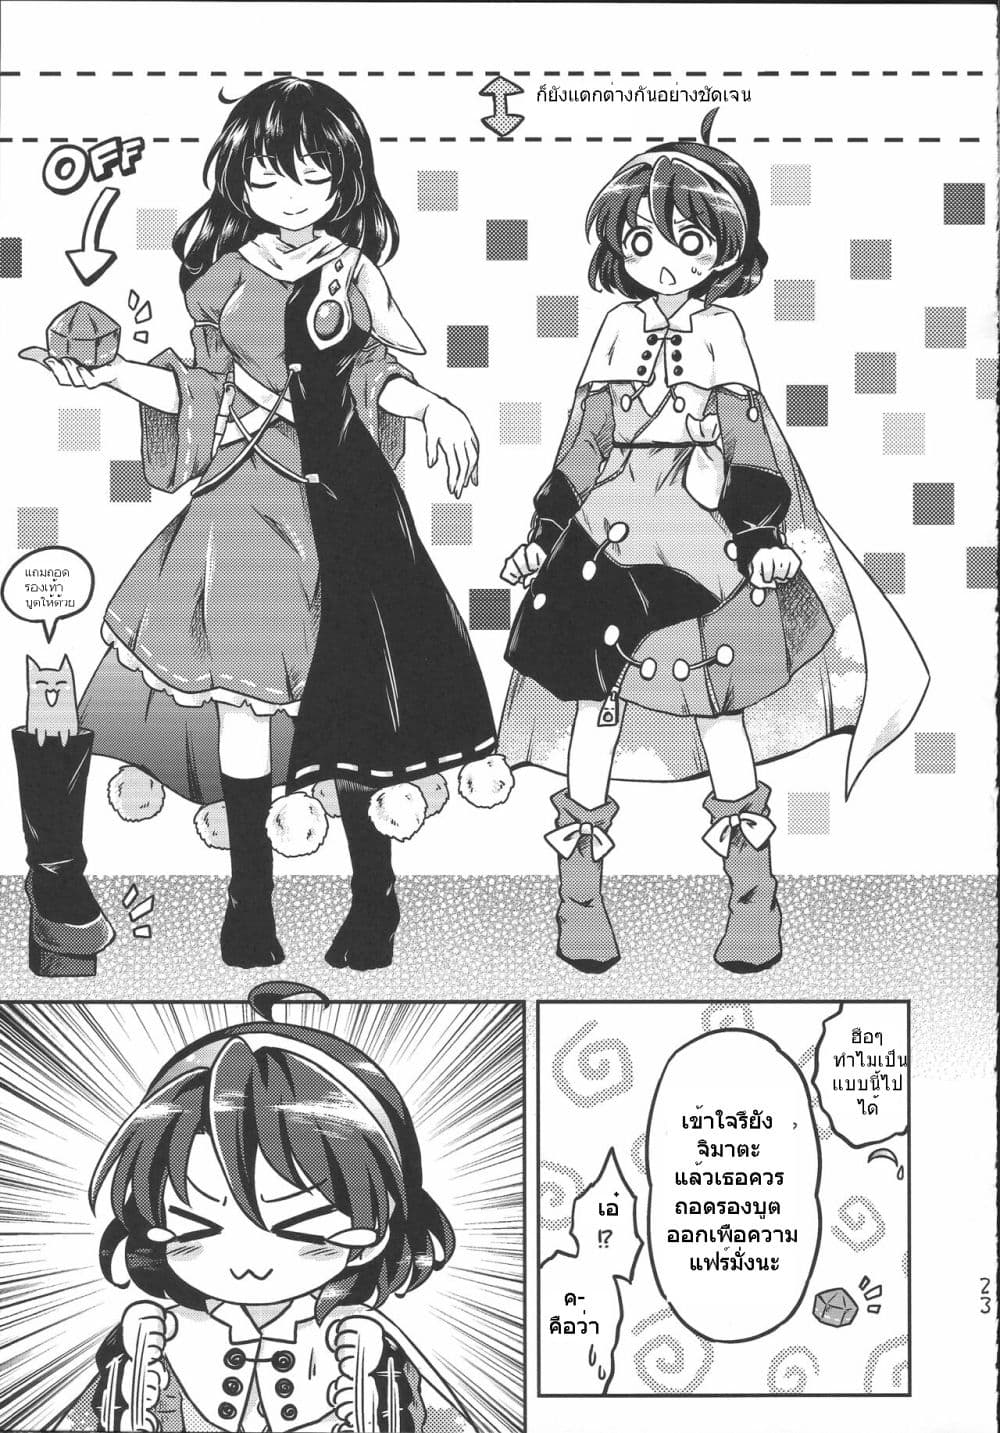 Touhou Project Chima Book By Pote ตอนที่ 1 (22)